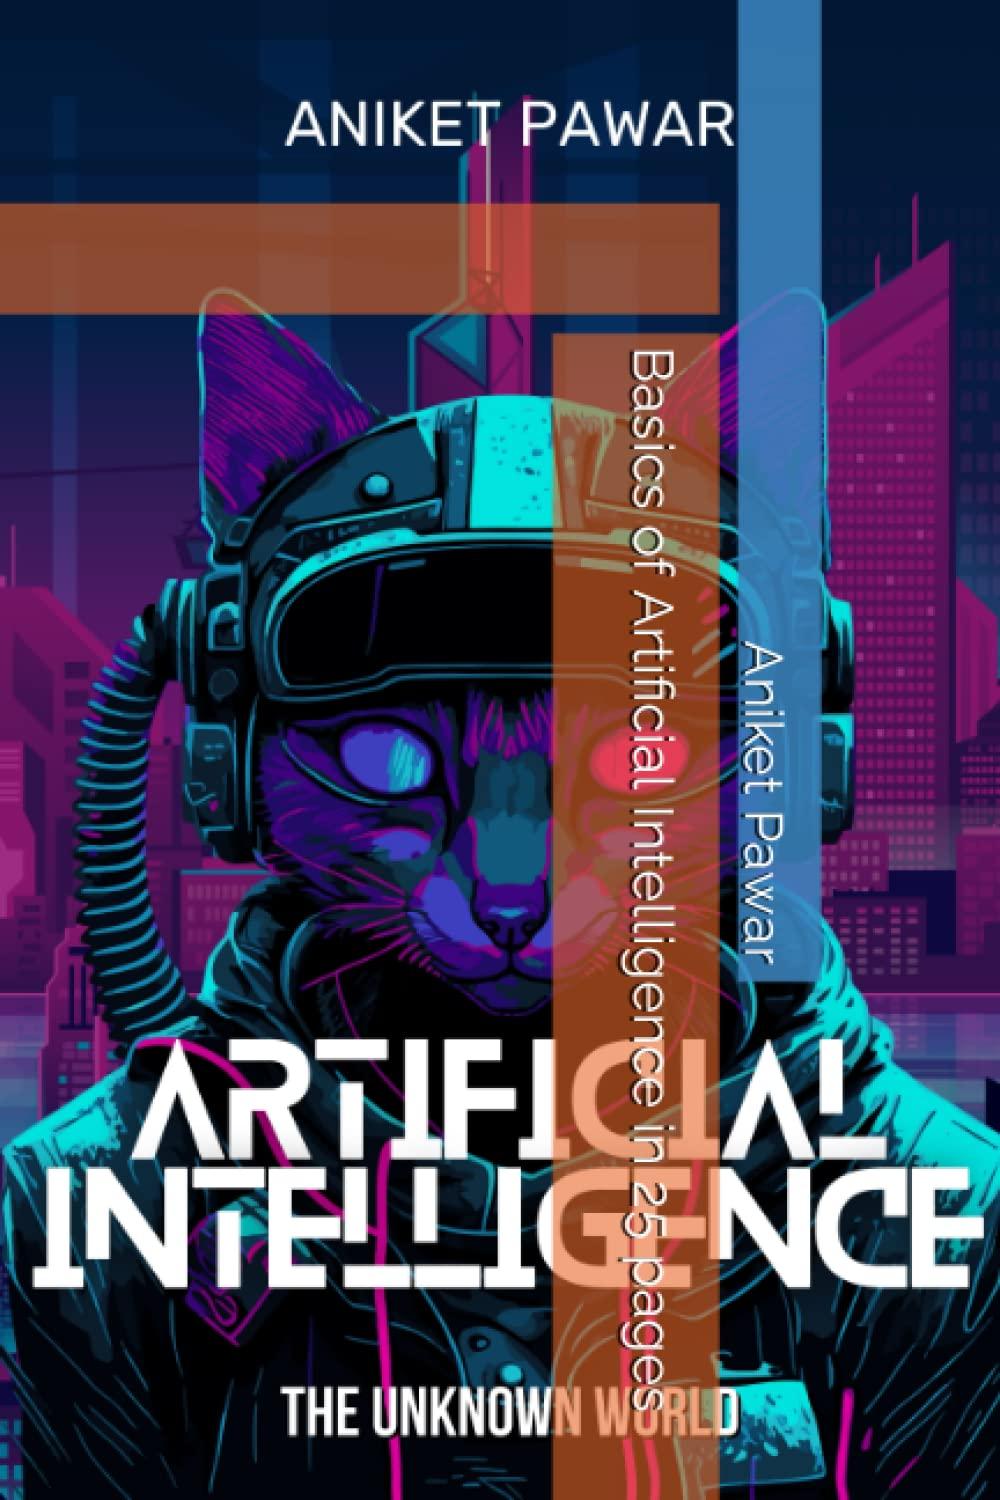 basics of artificial intelligence in 25 pages 1st edition aniket pawar b0c1jgkrxs, 979-8390582725